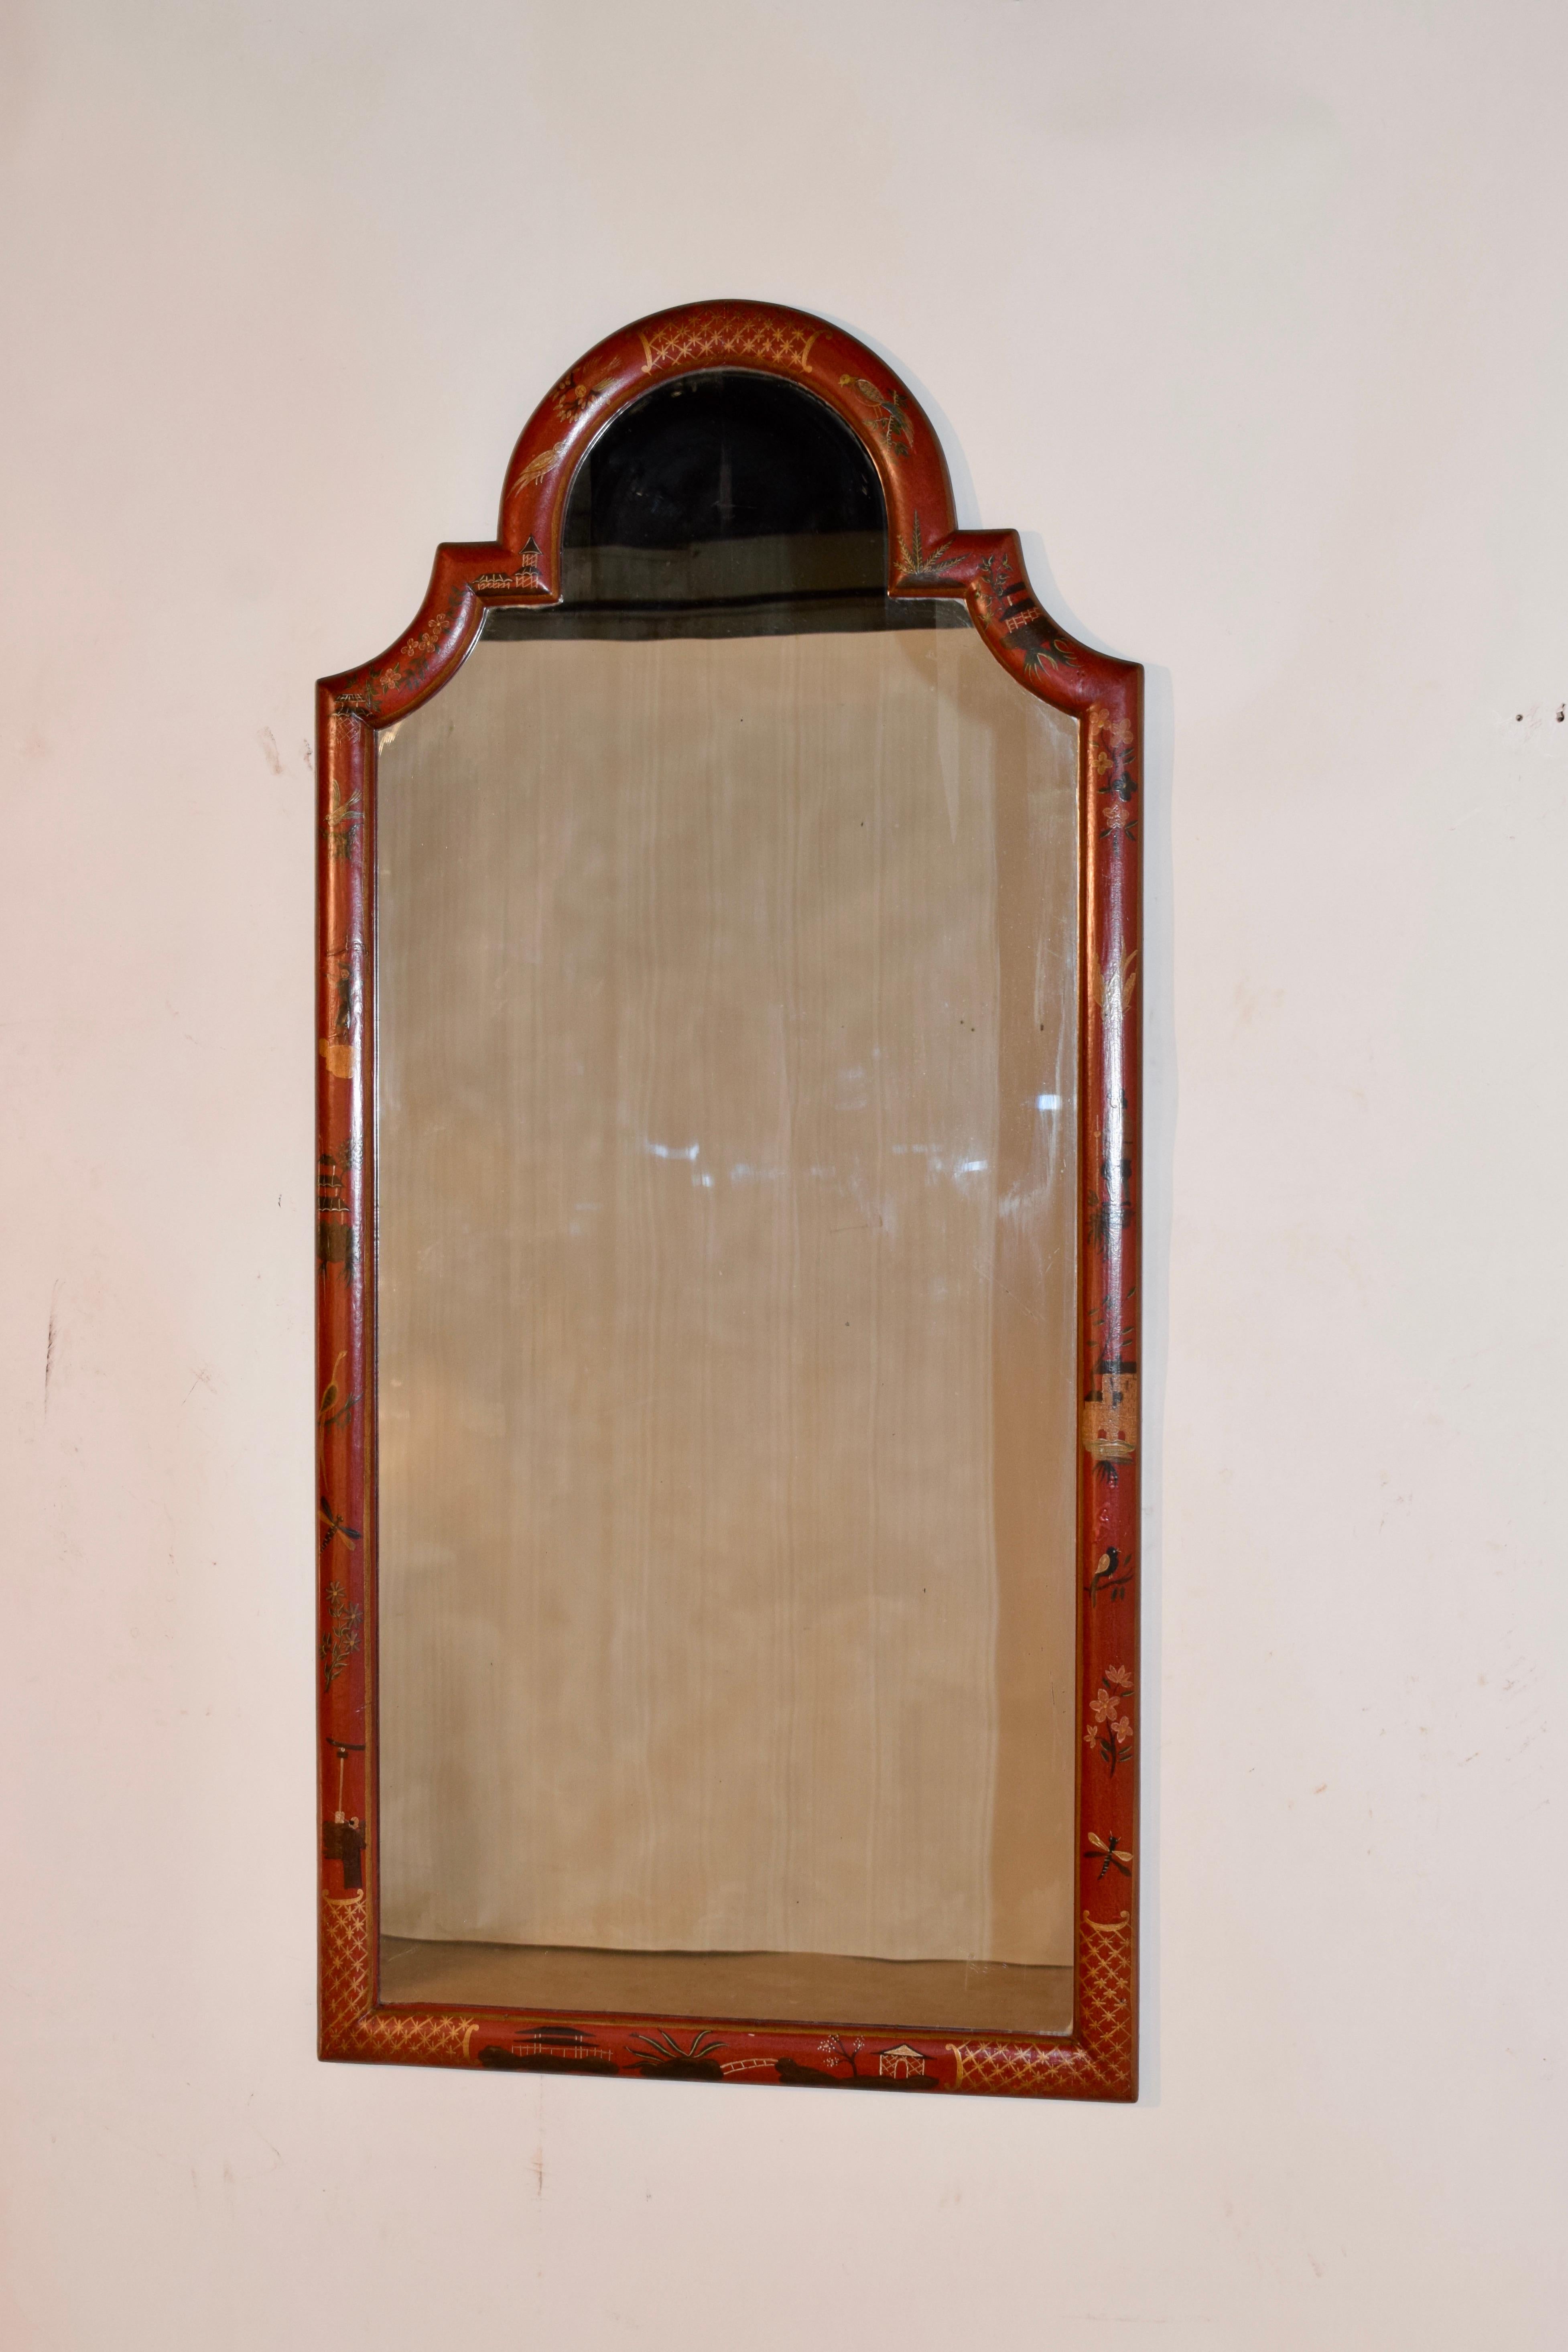 Mid-20th century Chippendale style mirror in a wonderful brick red color with chinoiserie style painting in gold on the frame. Marked Chapman on the back.